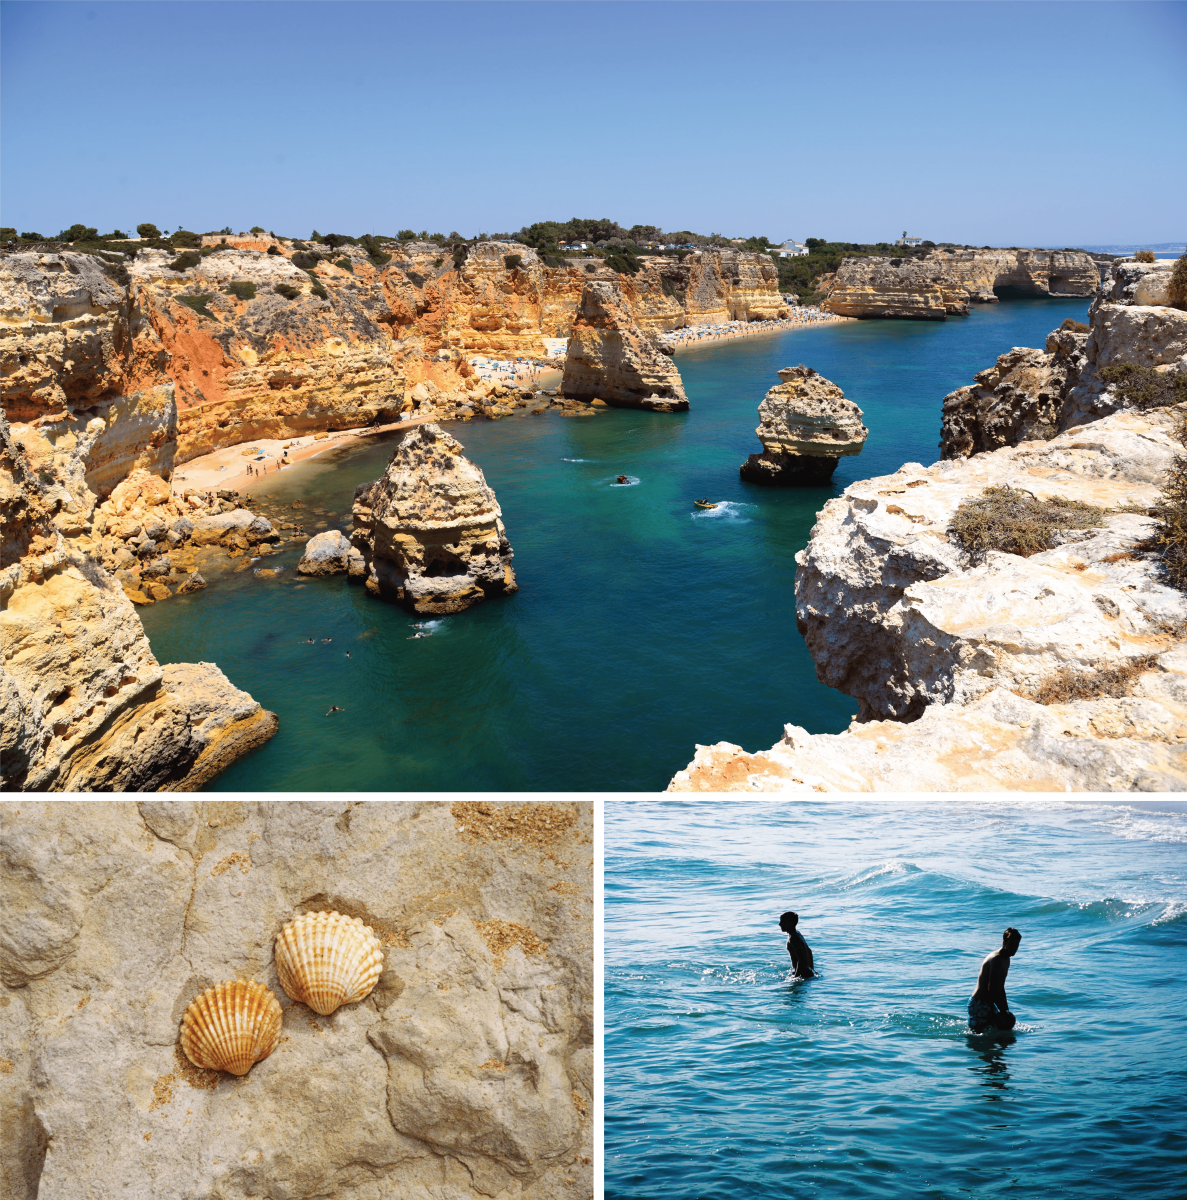 Beaches and ocean are the best what the Algarve has to offer.